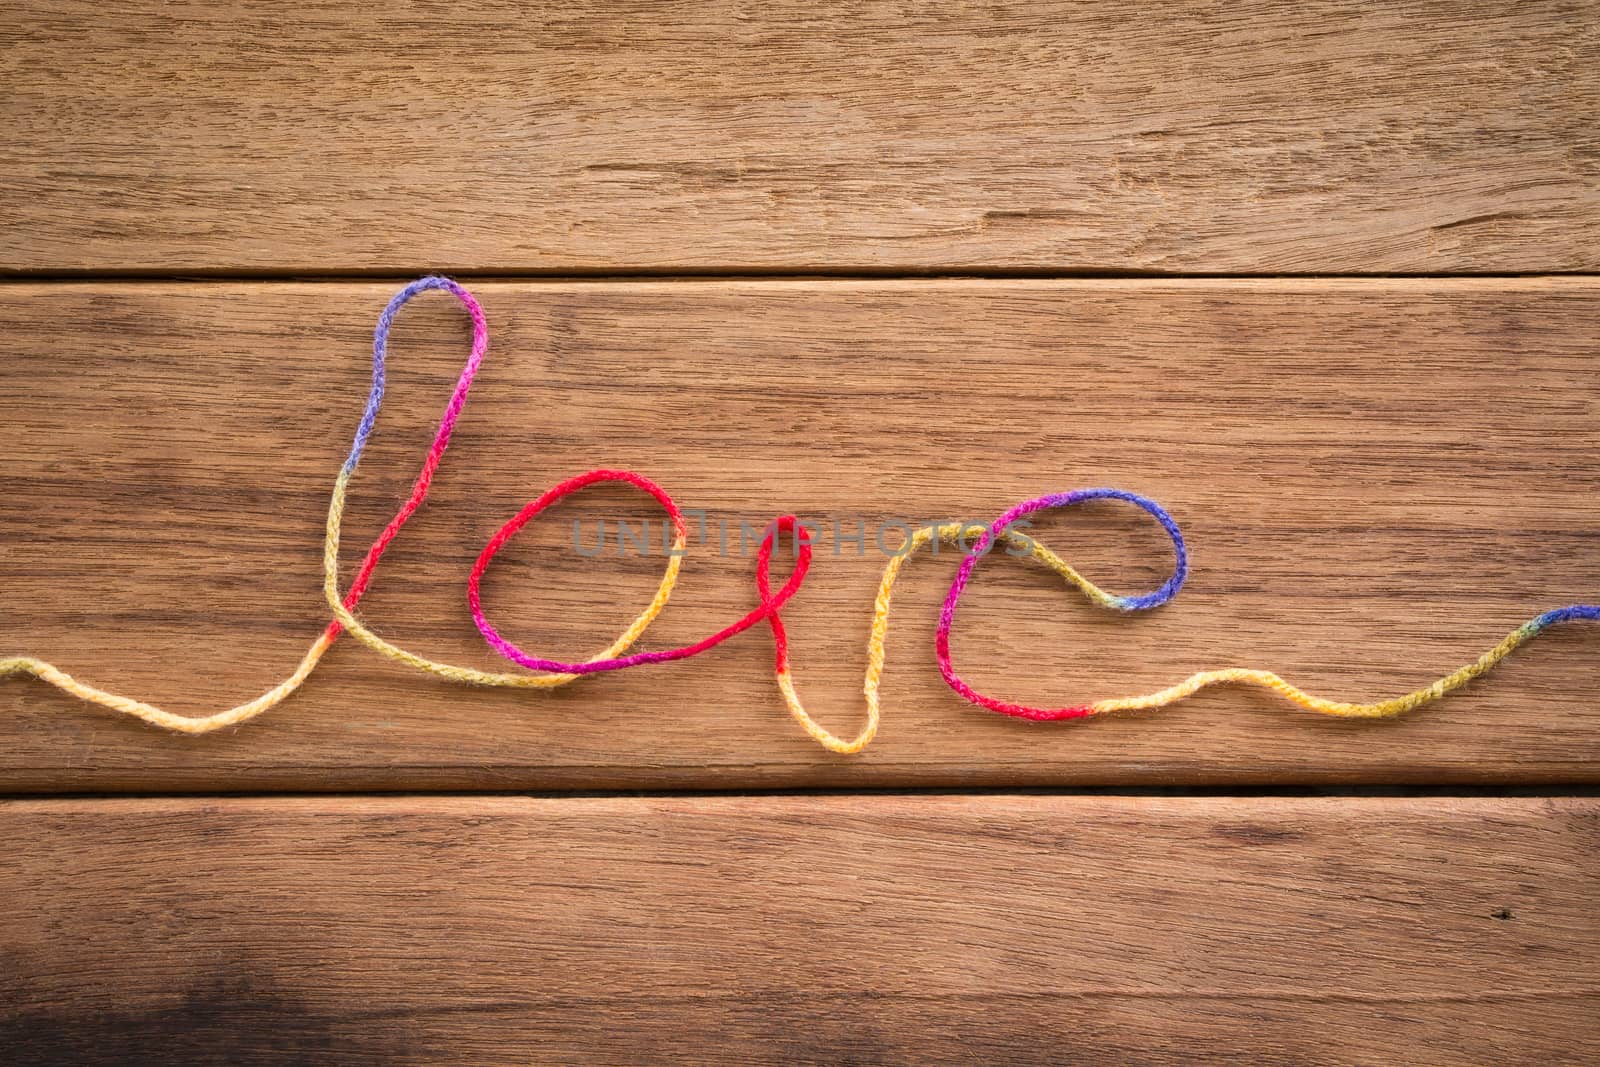 Sweet love word from colorful yarn place on wood texture, wedding and valentine's day symbol